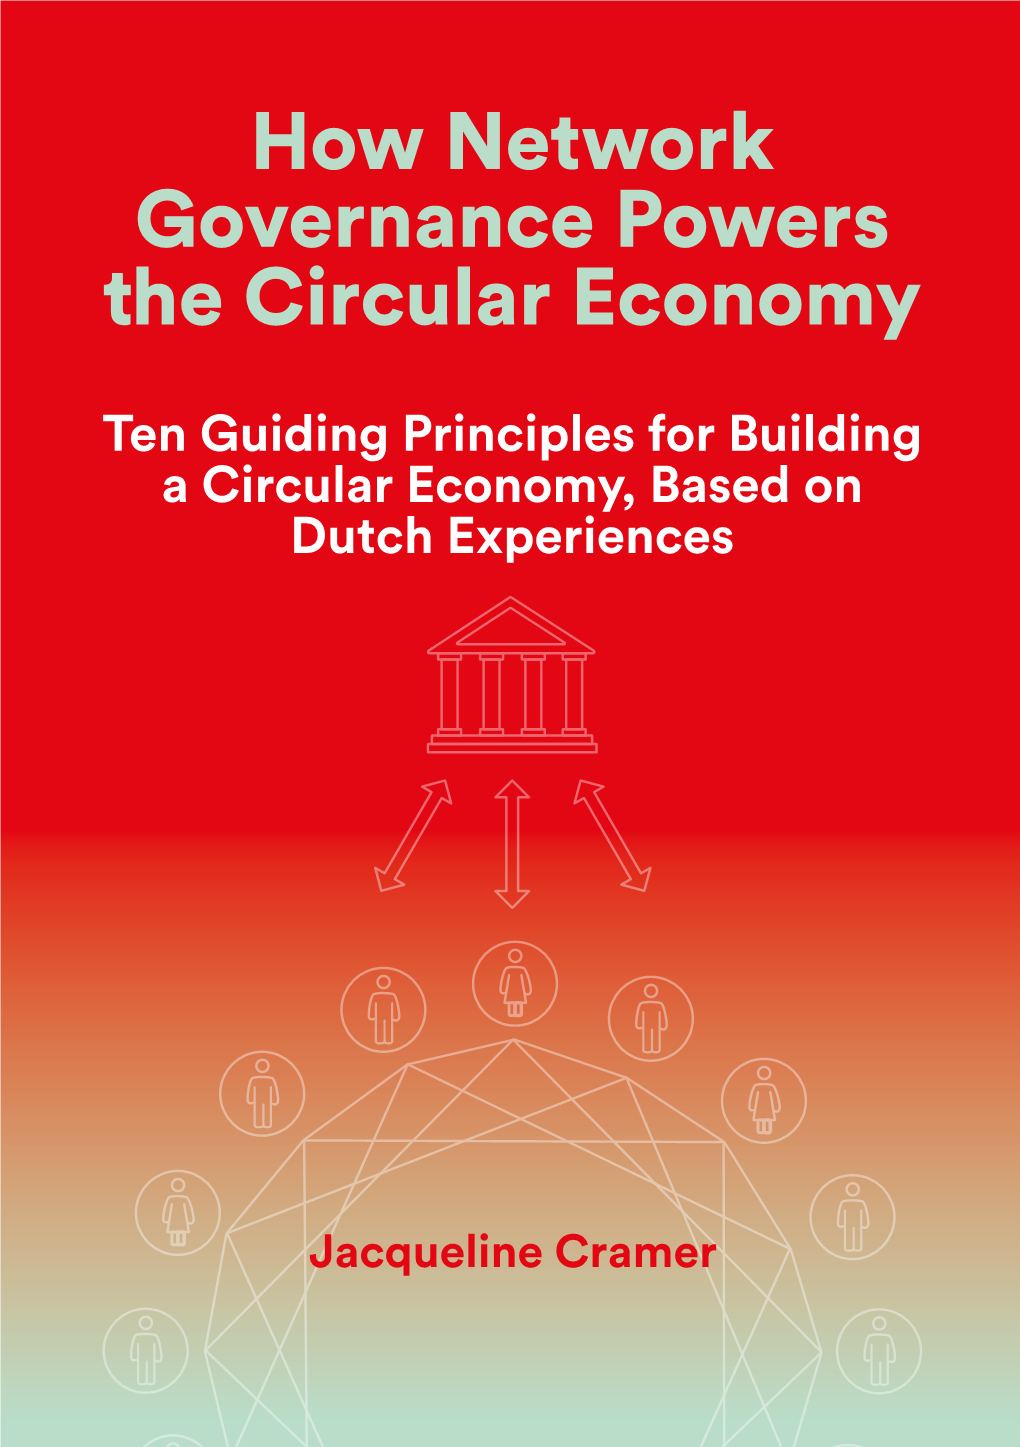 How Network Governance Powers the Circular Economy